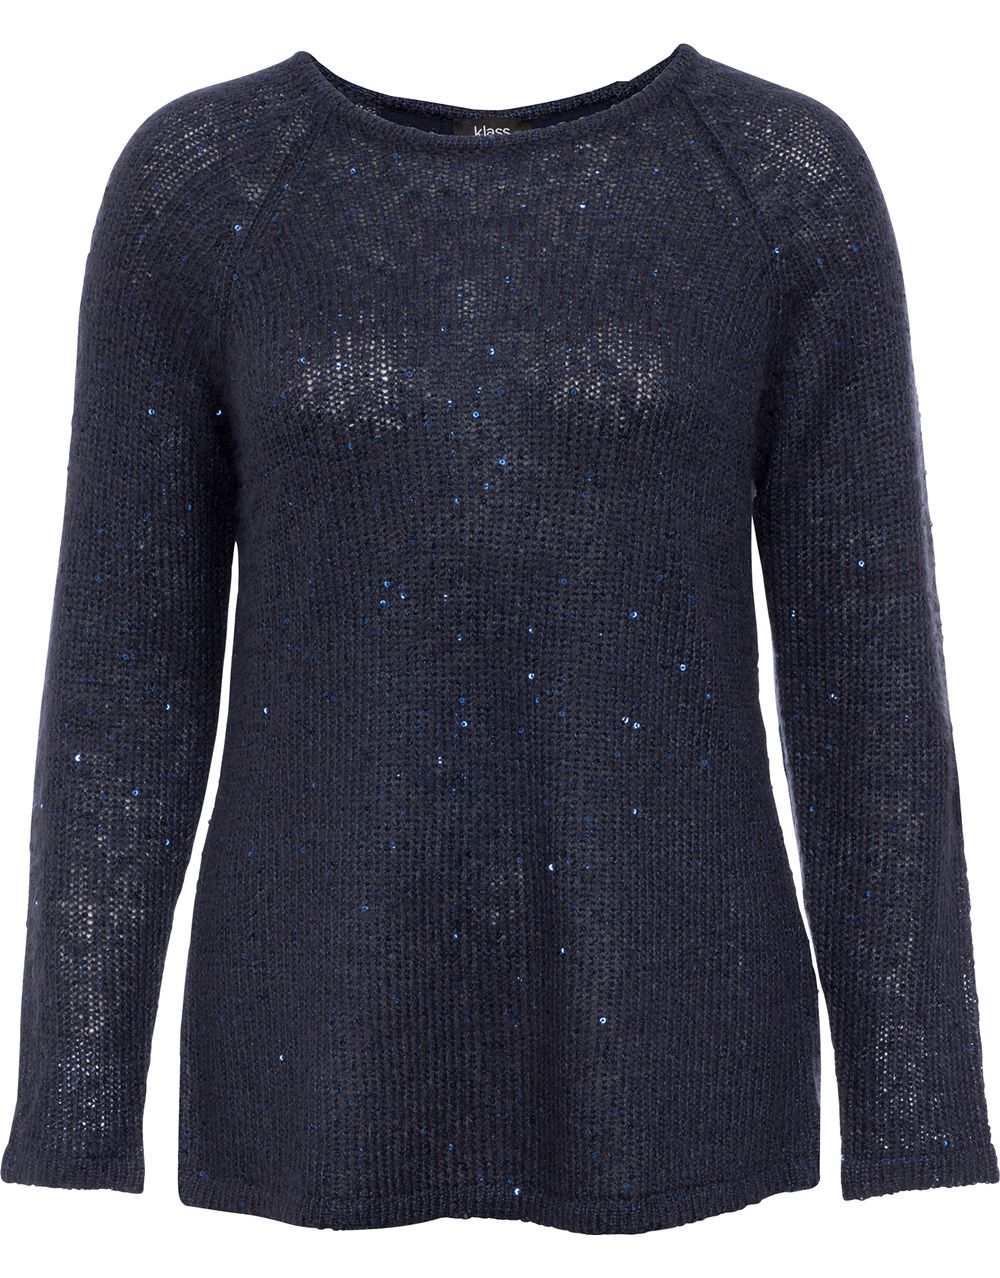 Long Sleeve Sequin Knit Top